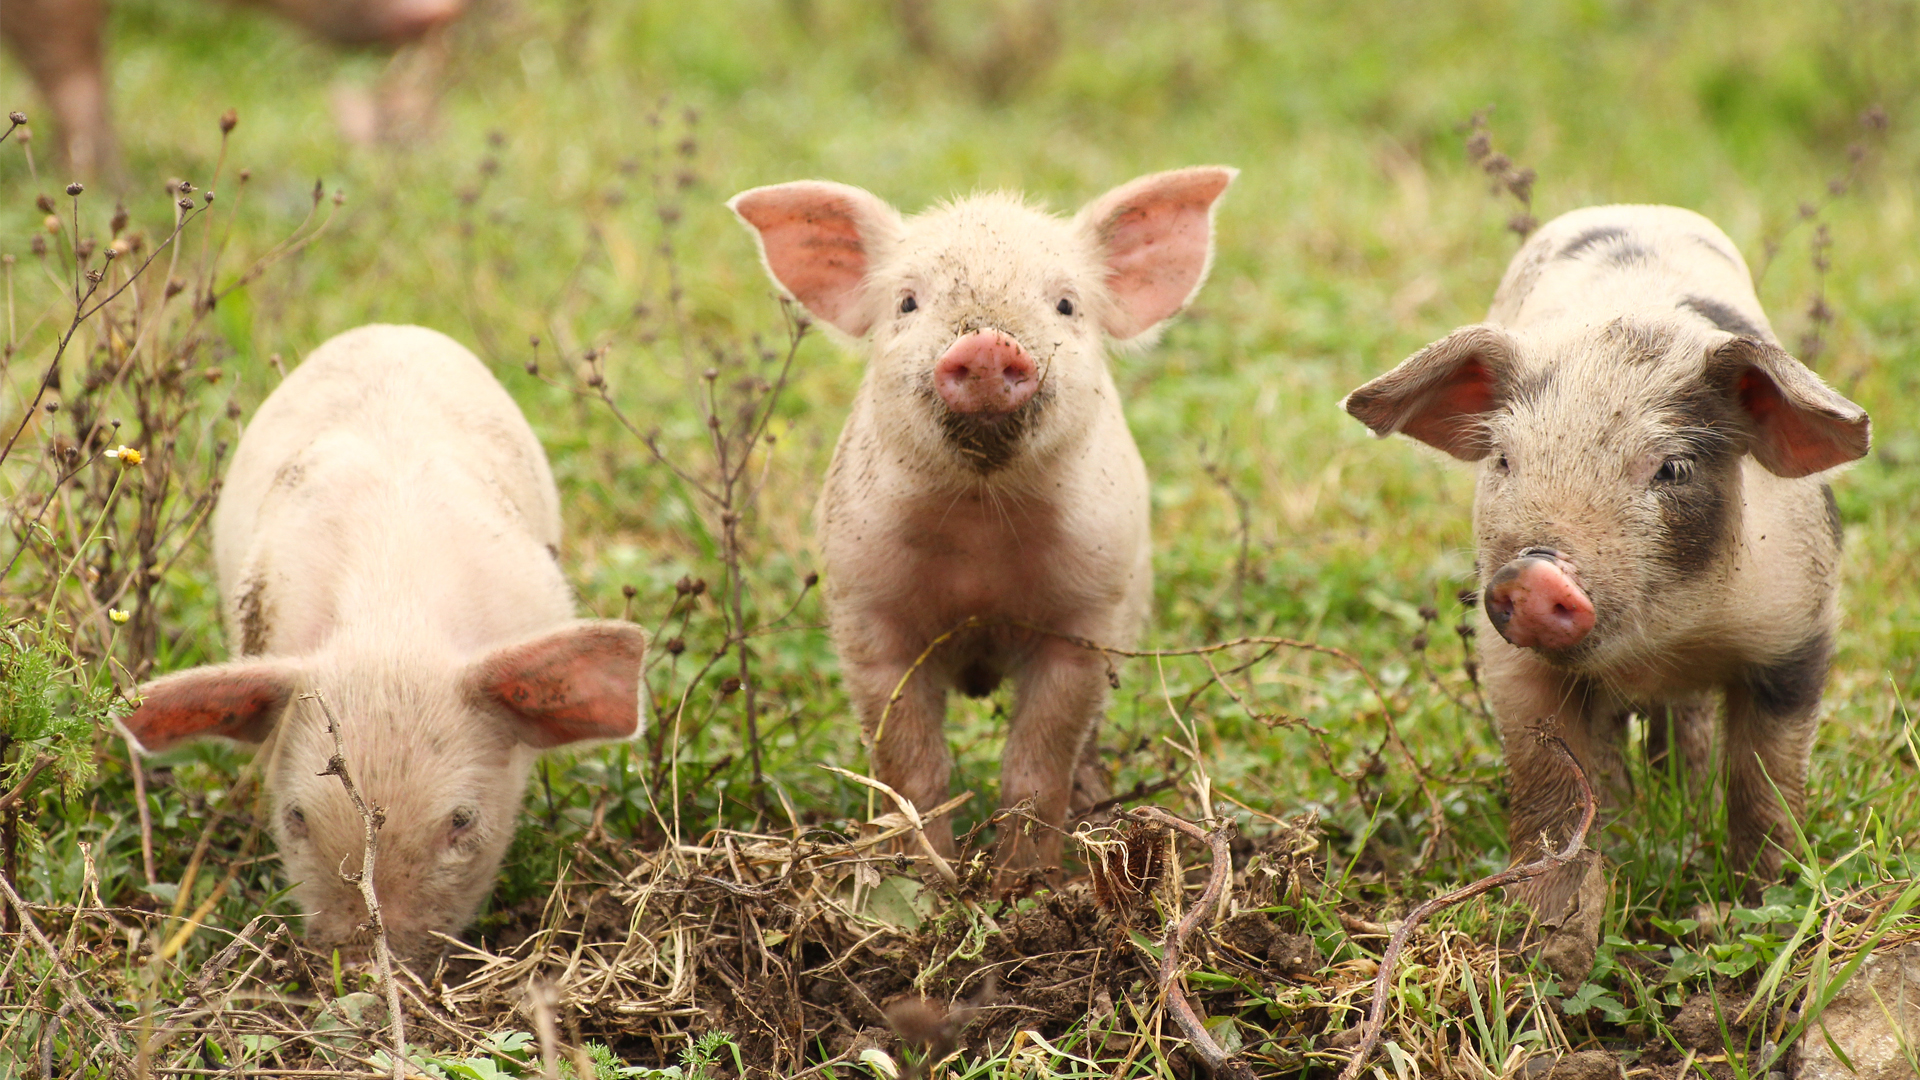 Animal welfare and ethical responsibility in farming